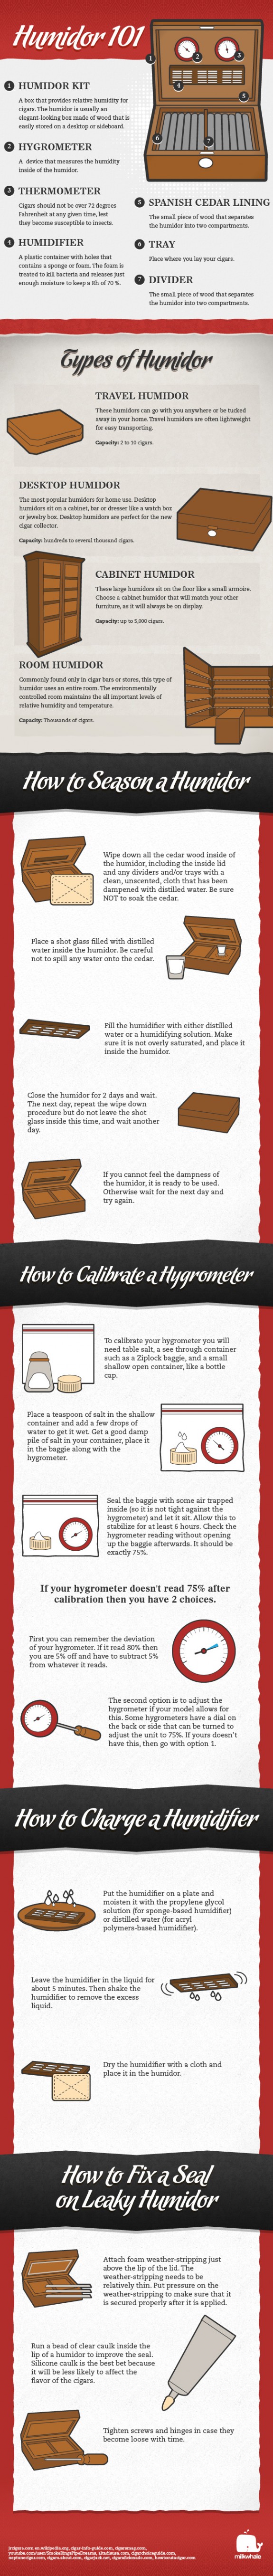 Thumbnail for Types of Humidor: An Infographic